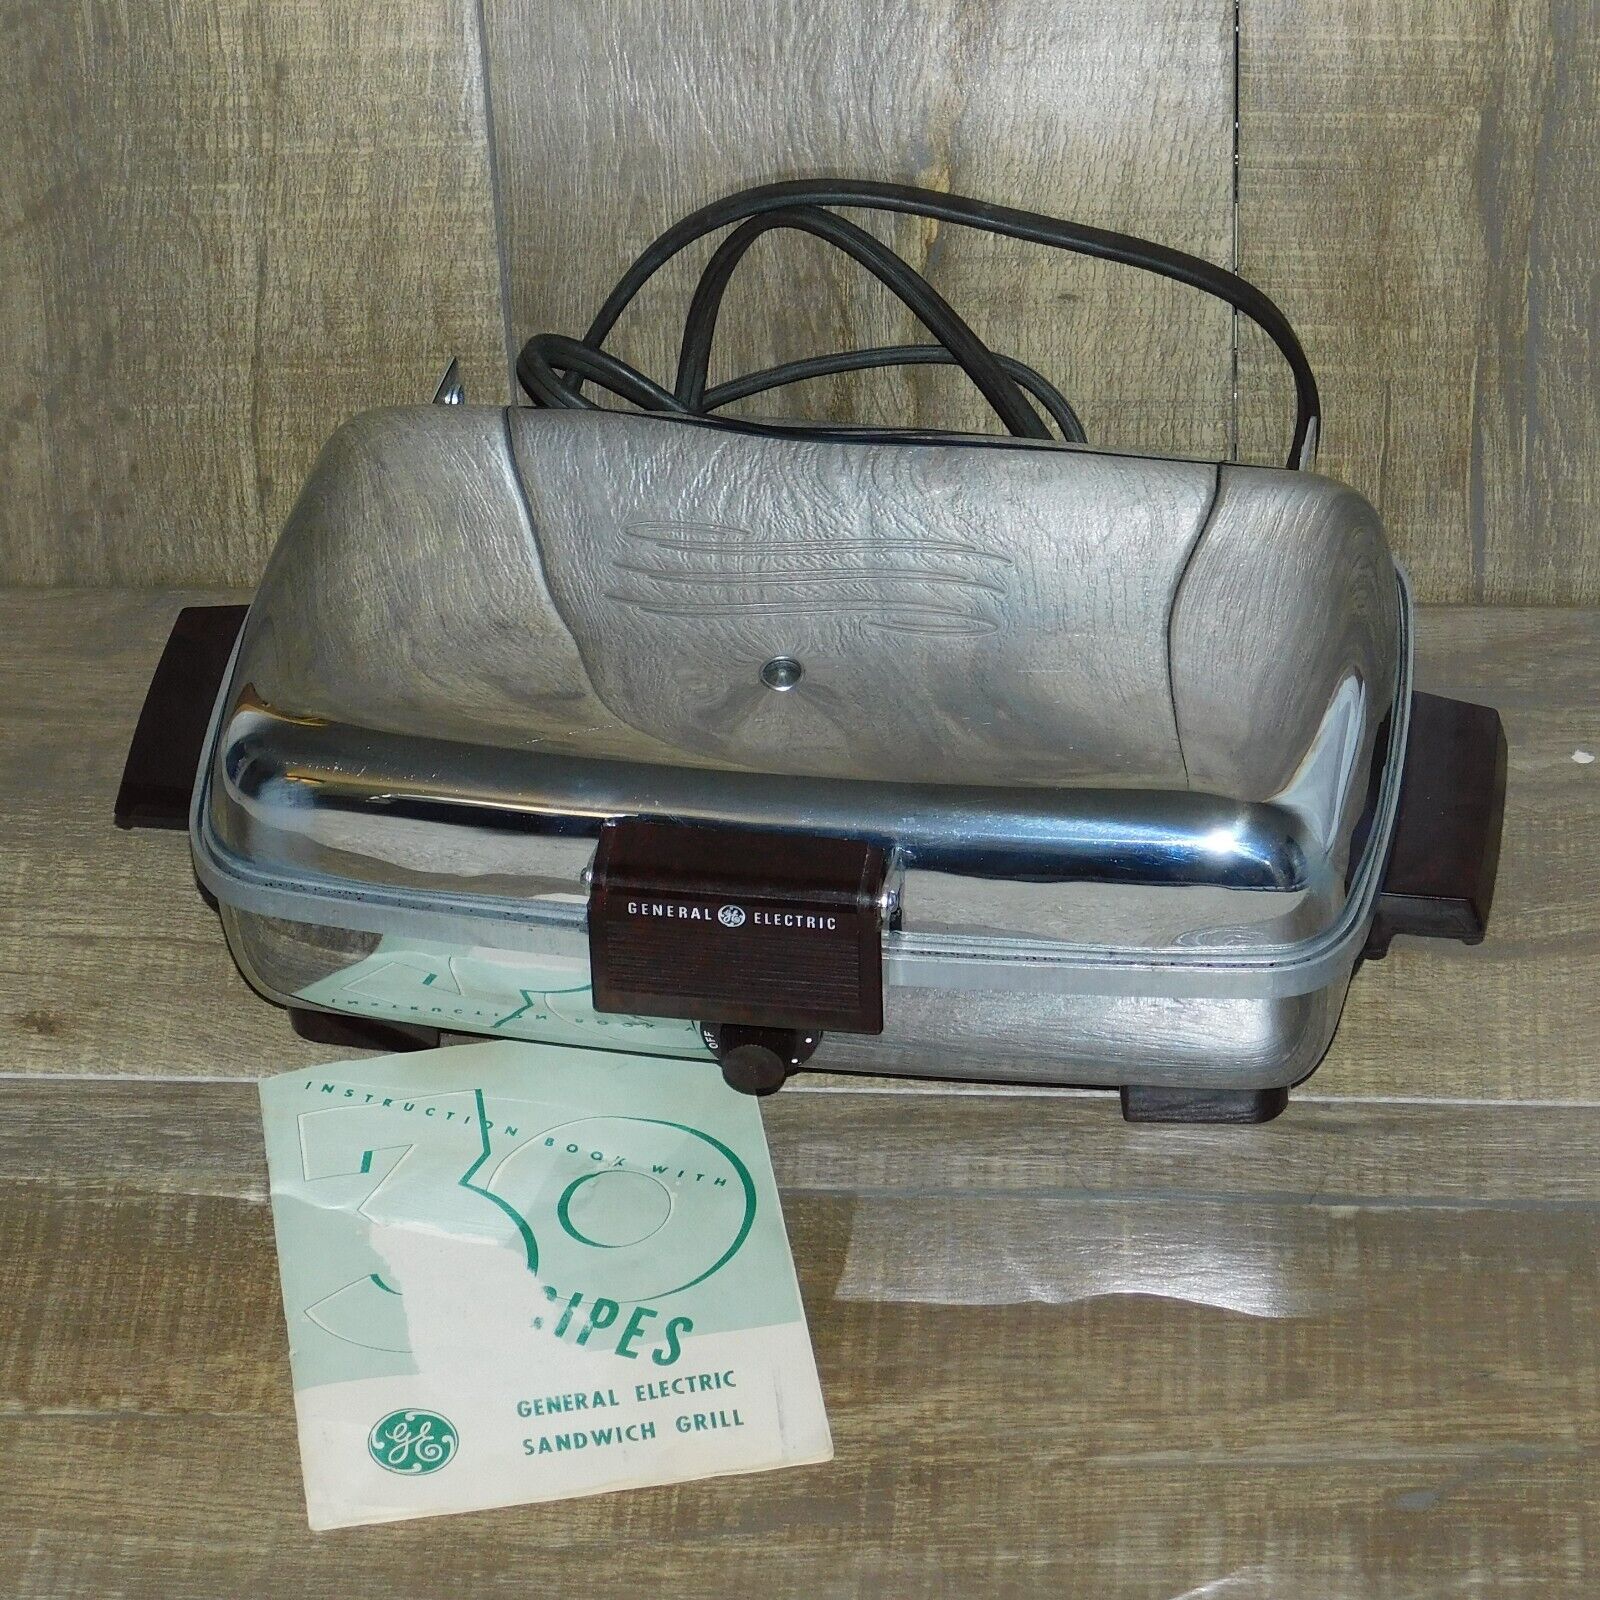 Vtg 1950s General Electric Sandwich Grill Waffle Iron 159G40 USA Chrome Works